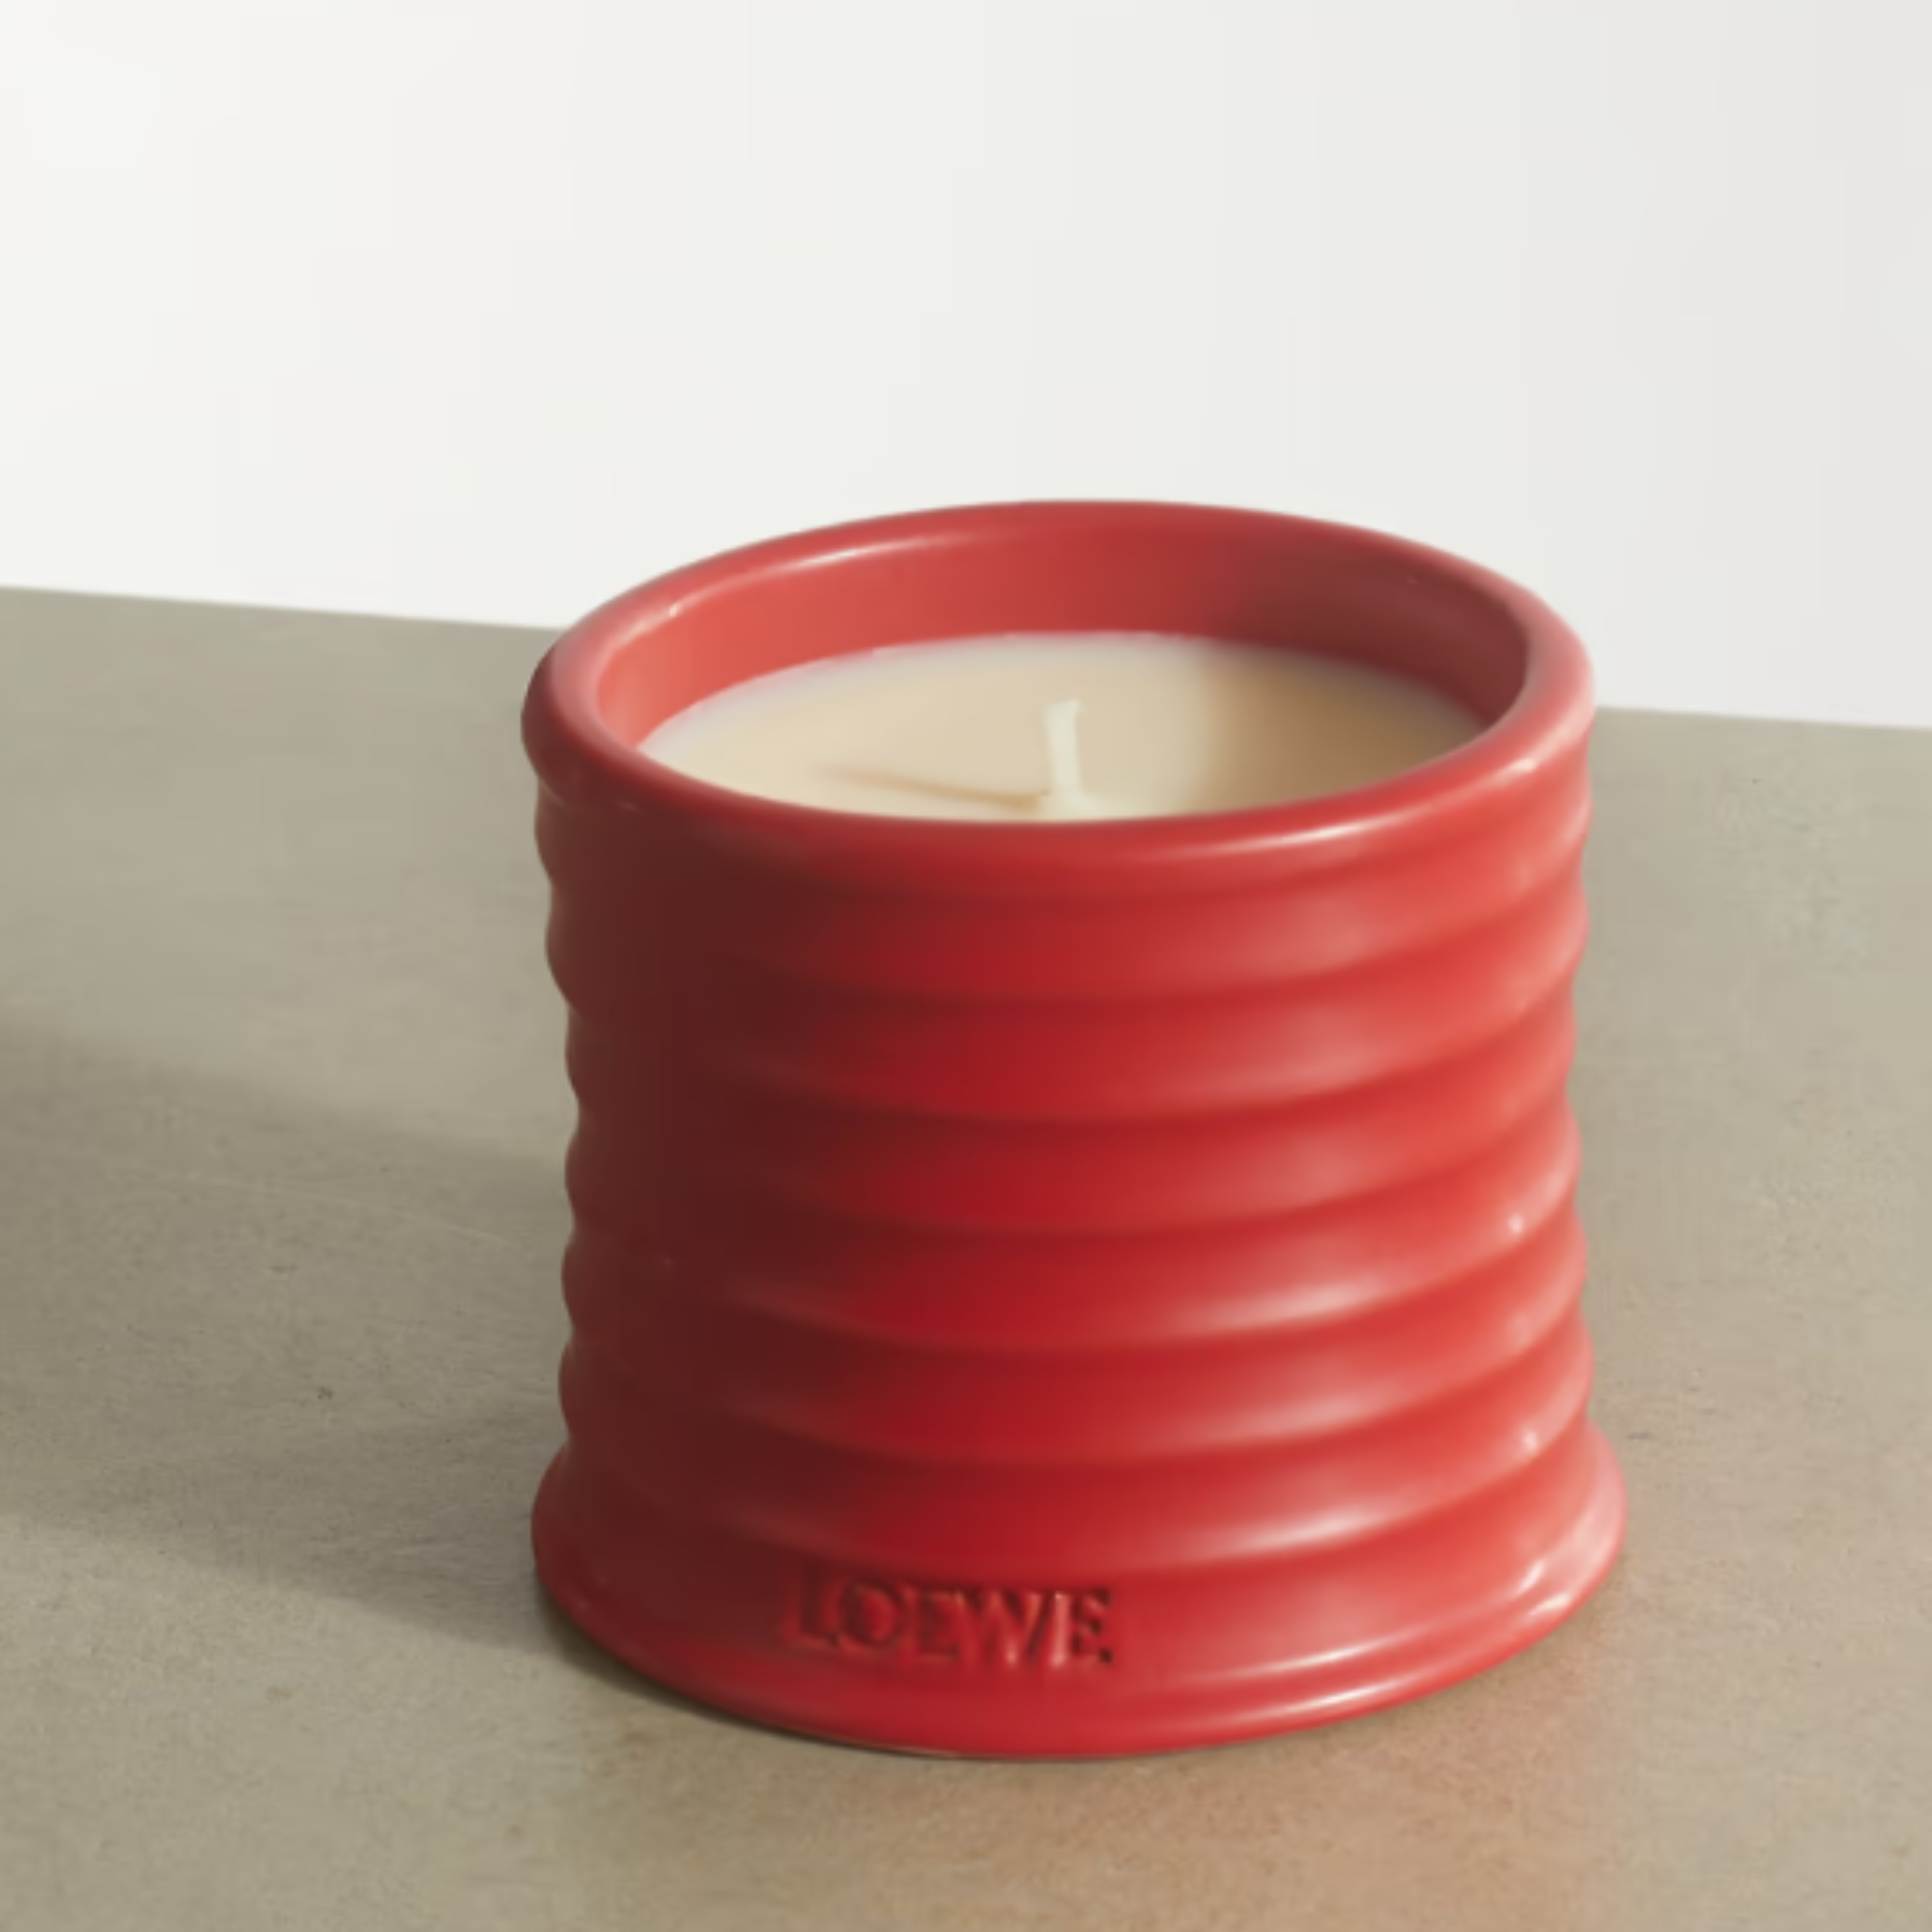 red candle product shot